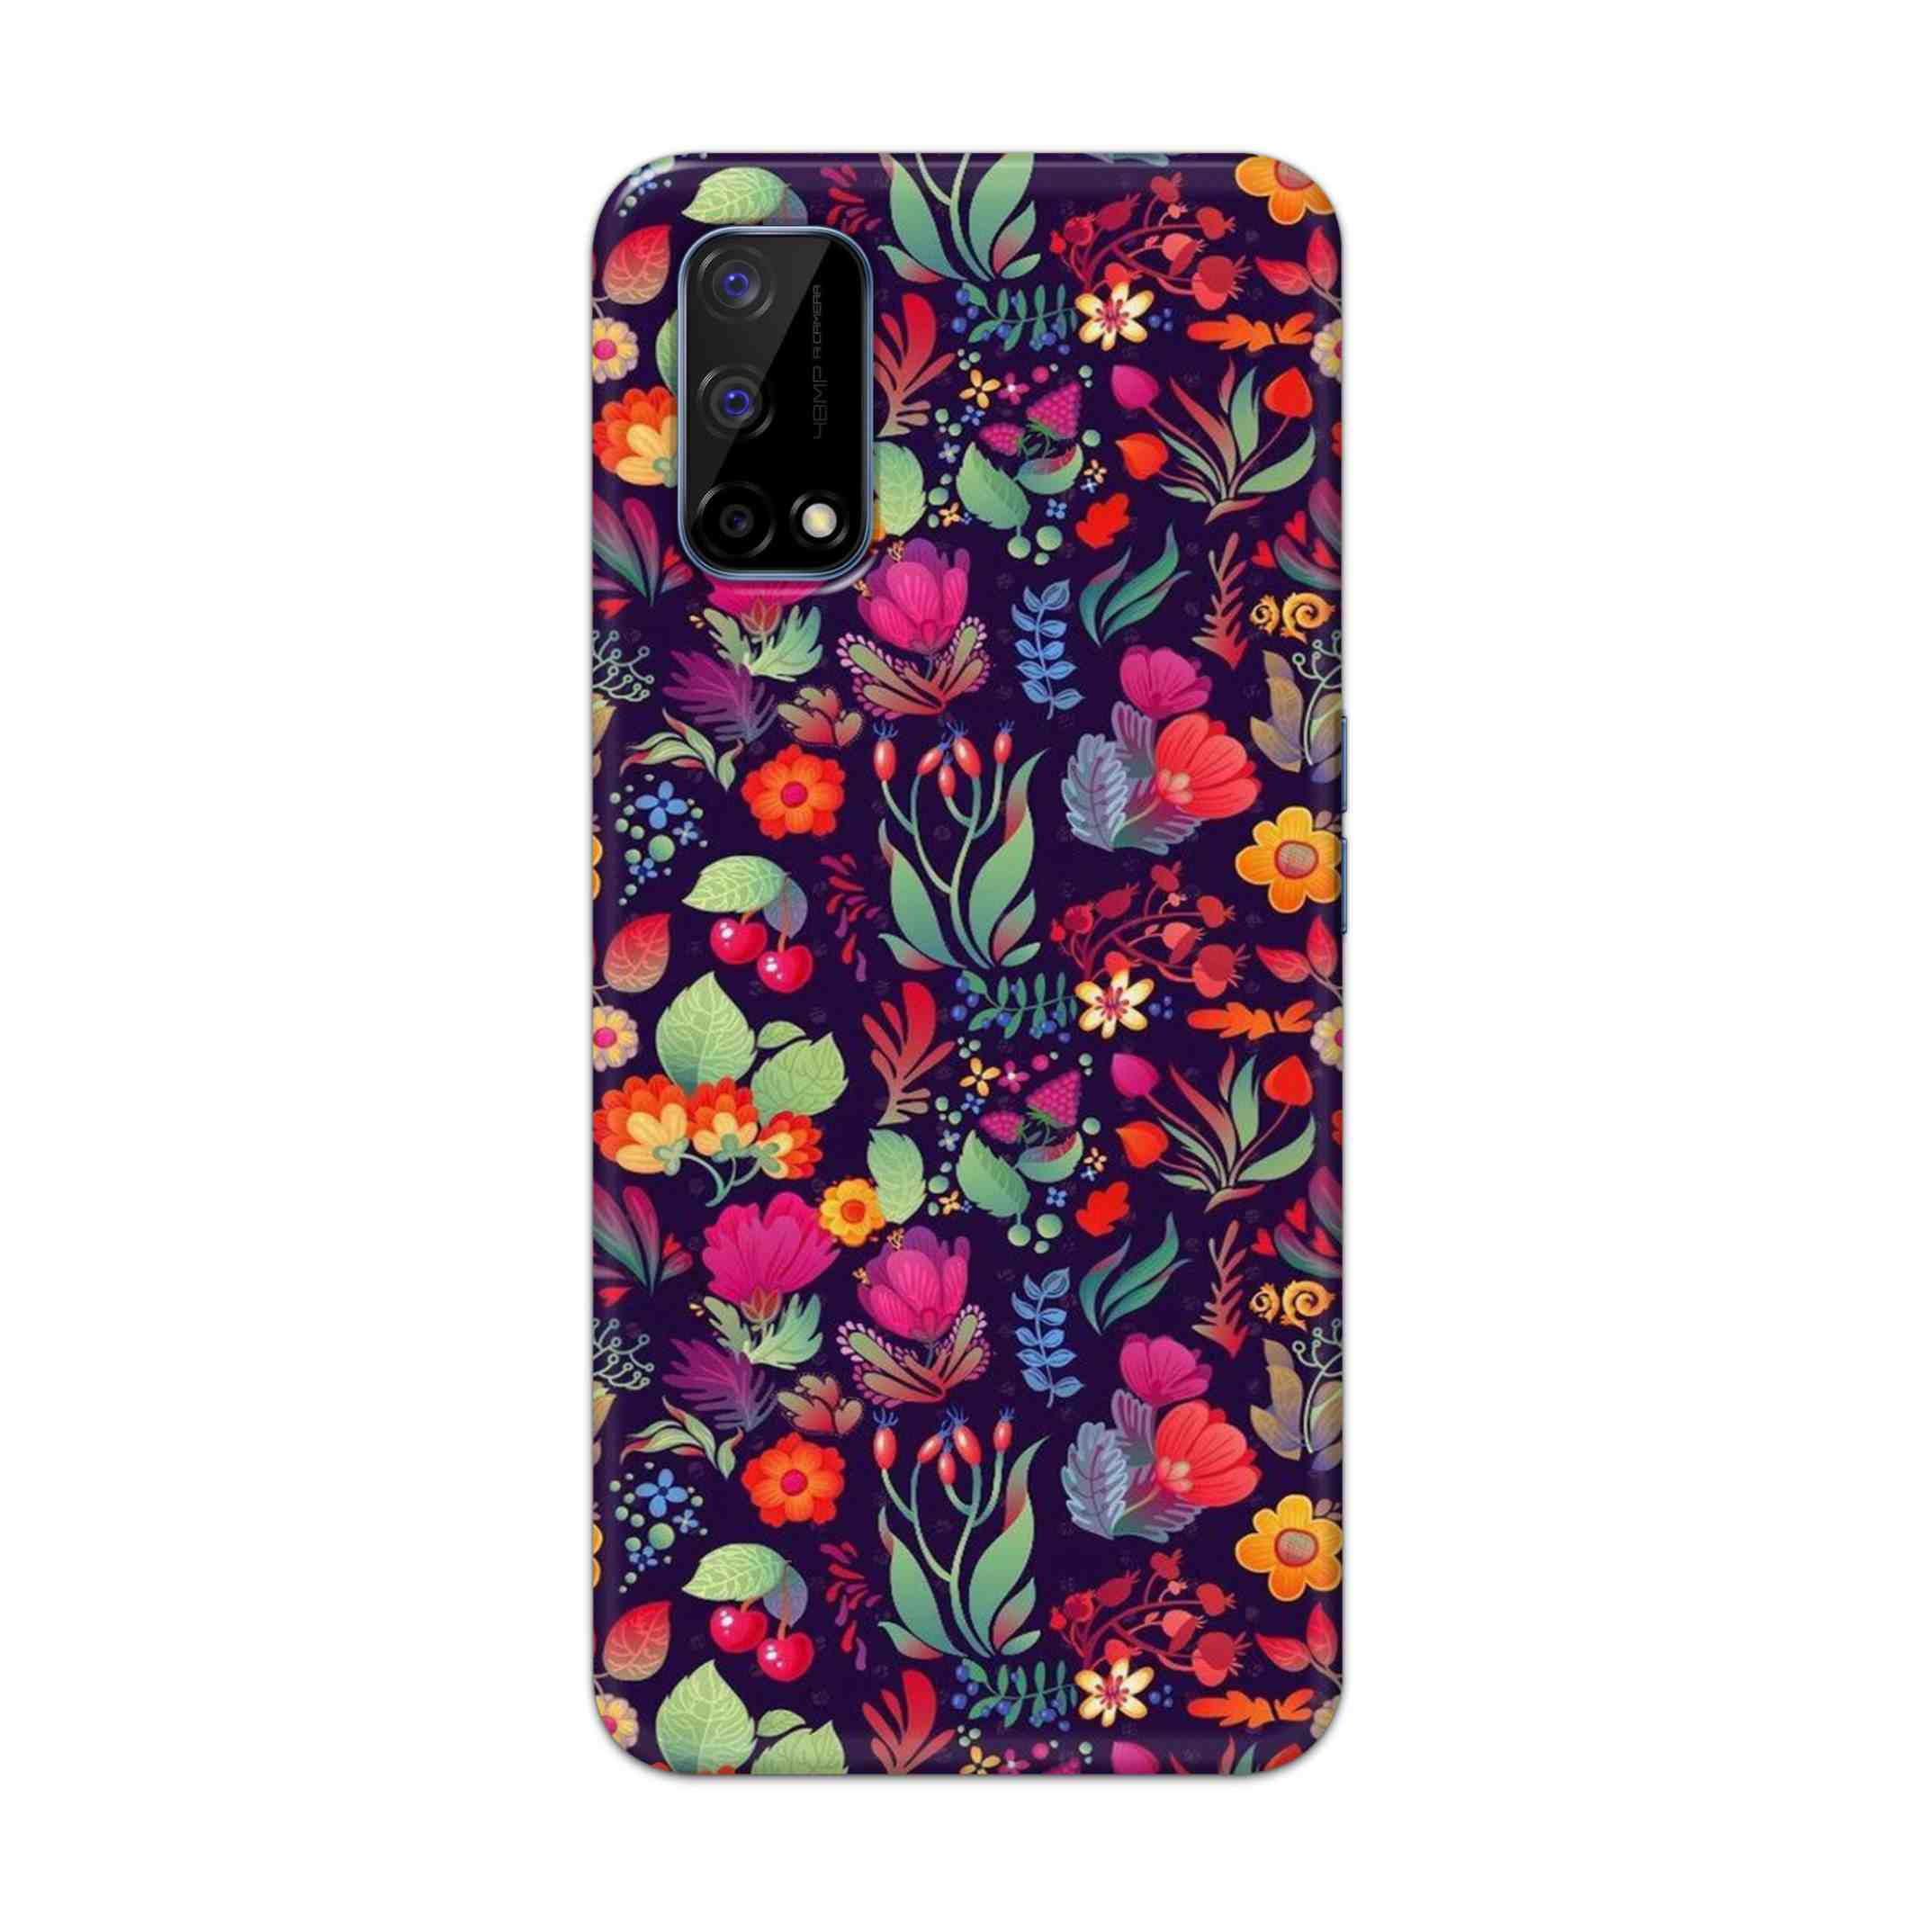 Buy Fruits Flower Hard Back Mobile Phone Case Cover For Realme Narzo 30 Pro Online